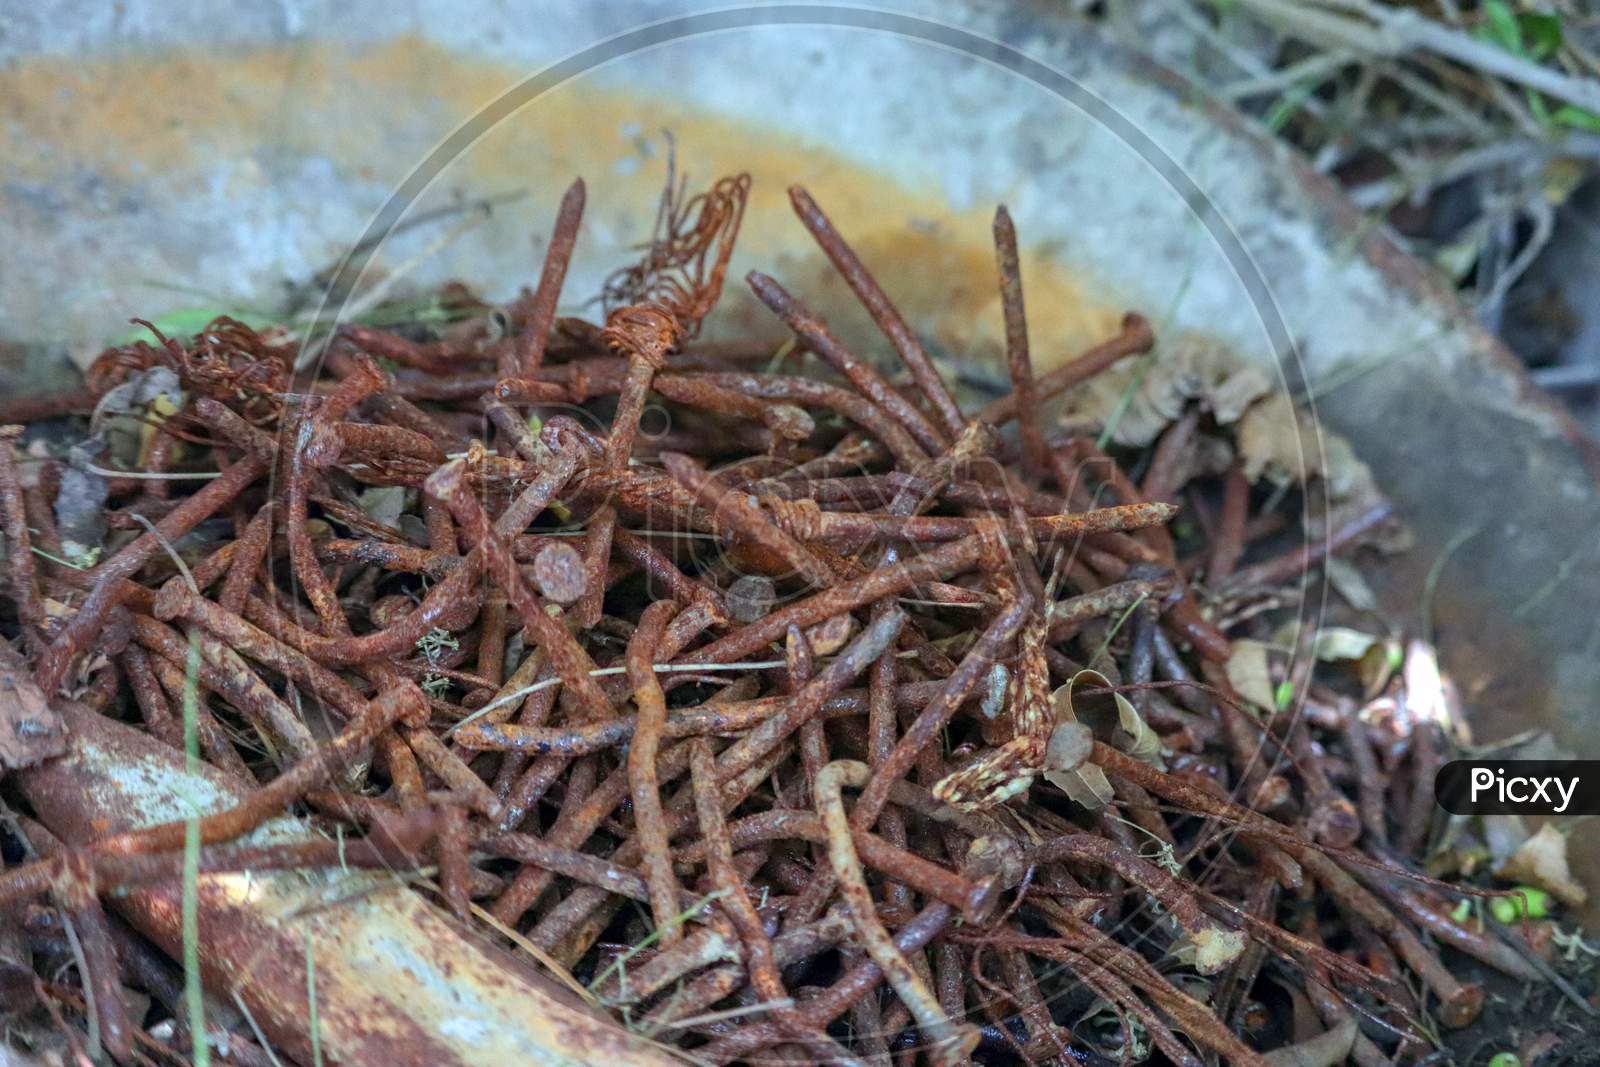 Group Of Brown Nails  Or Panel Pin Nails  In Outdoors